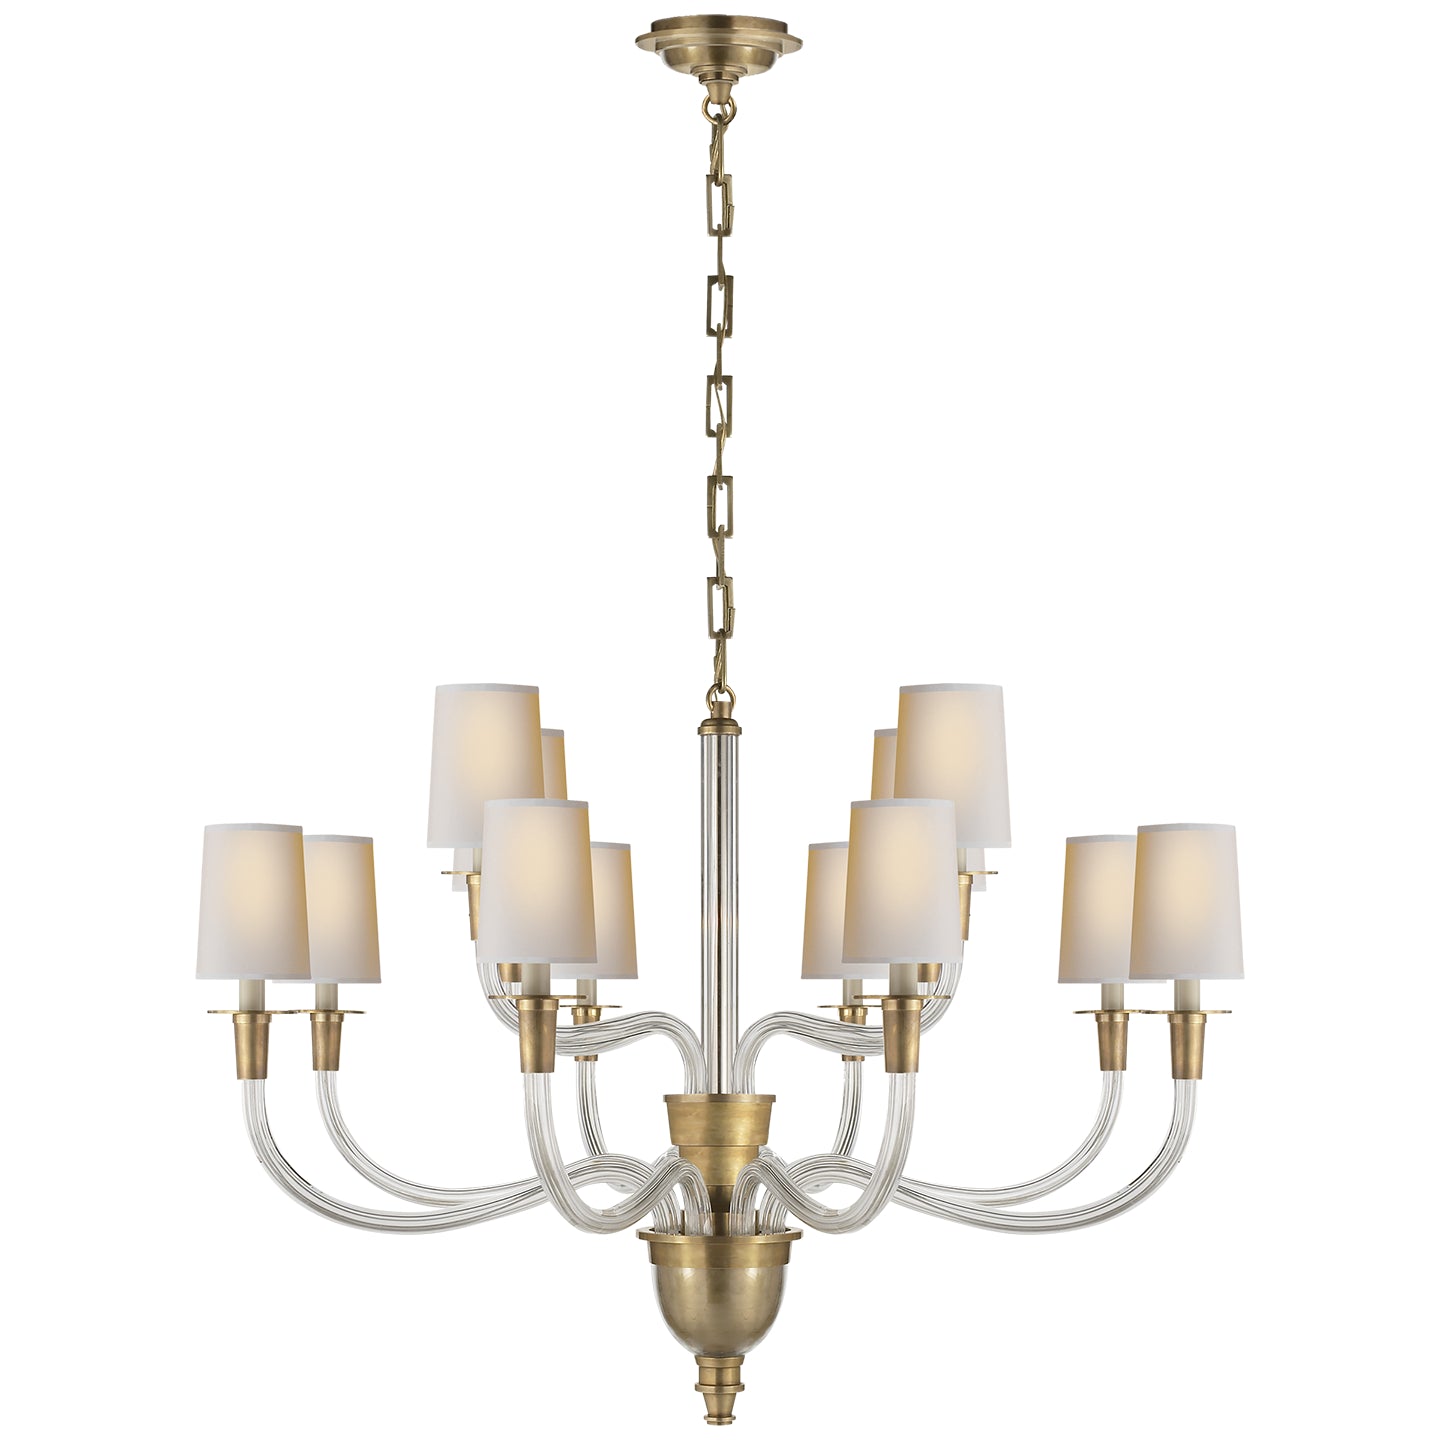 Load image into Gallery viewer, Visual Comfort Signature - TOB 5033HAB-NP - 12 Light Chandelier - Vivian - Hand-Rubbed Antique Brass
